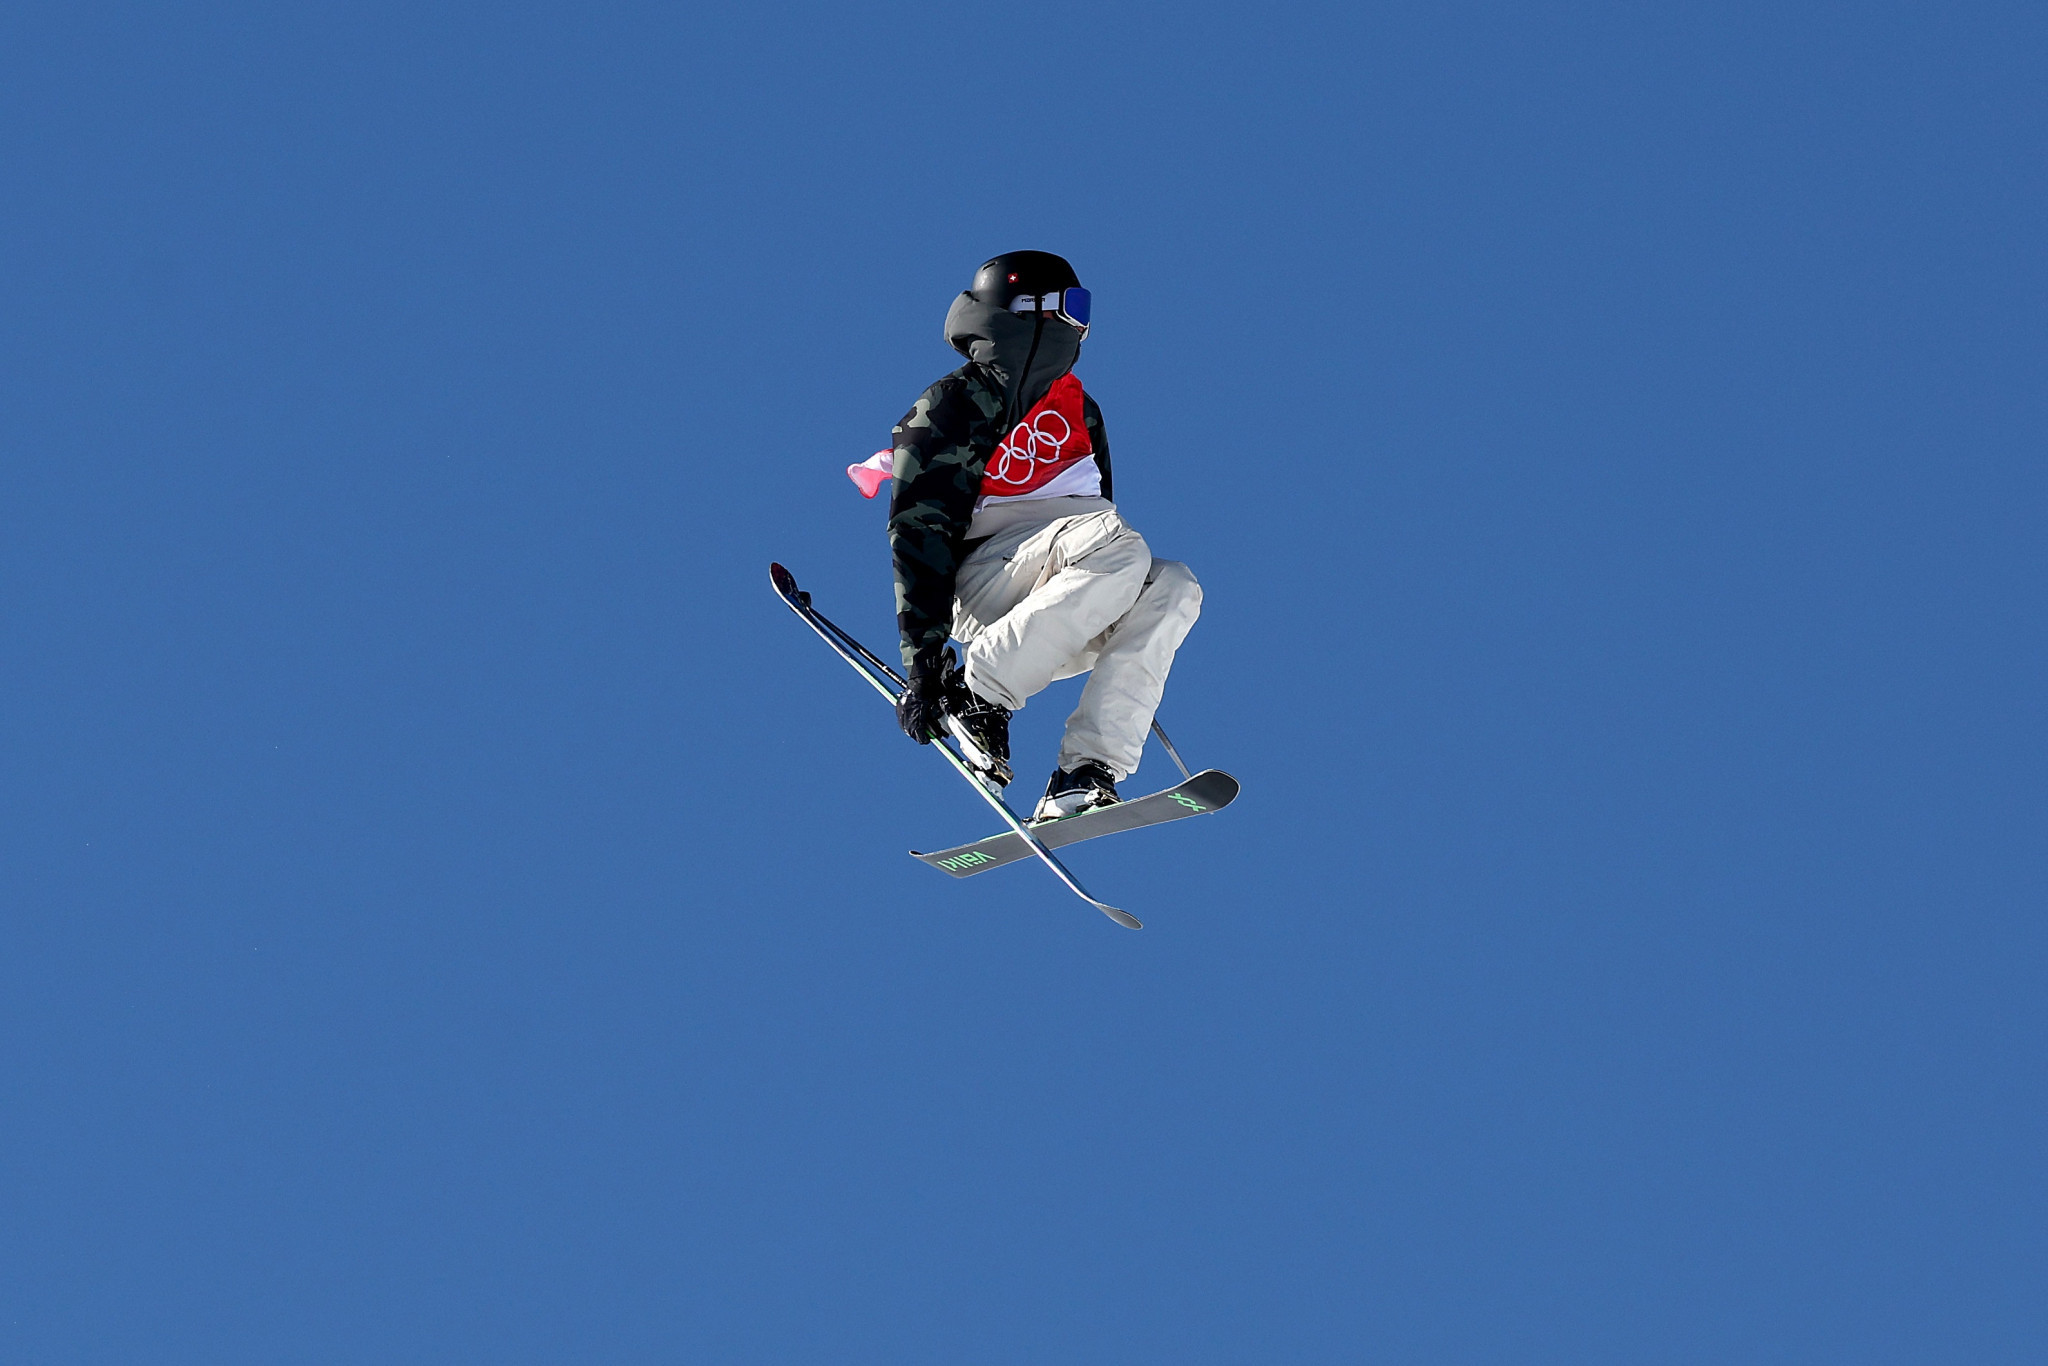 Andri Ragettli overcame Beijing 2022 heartbreak to land gold at the Slopestyle World Cup in Bakuriani ©Getty Images